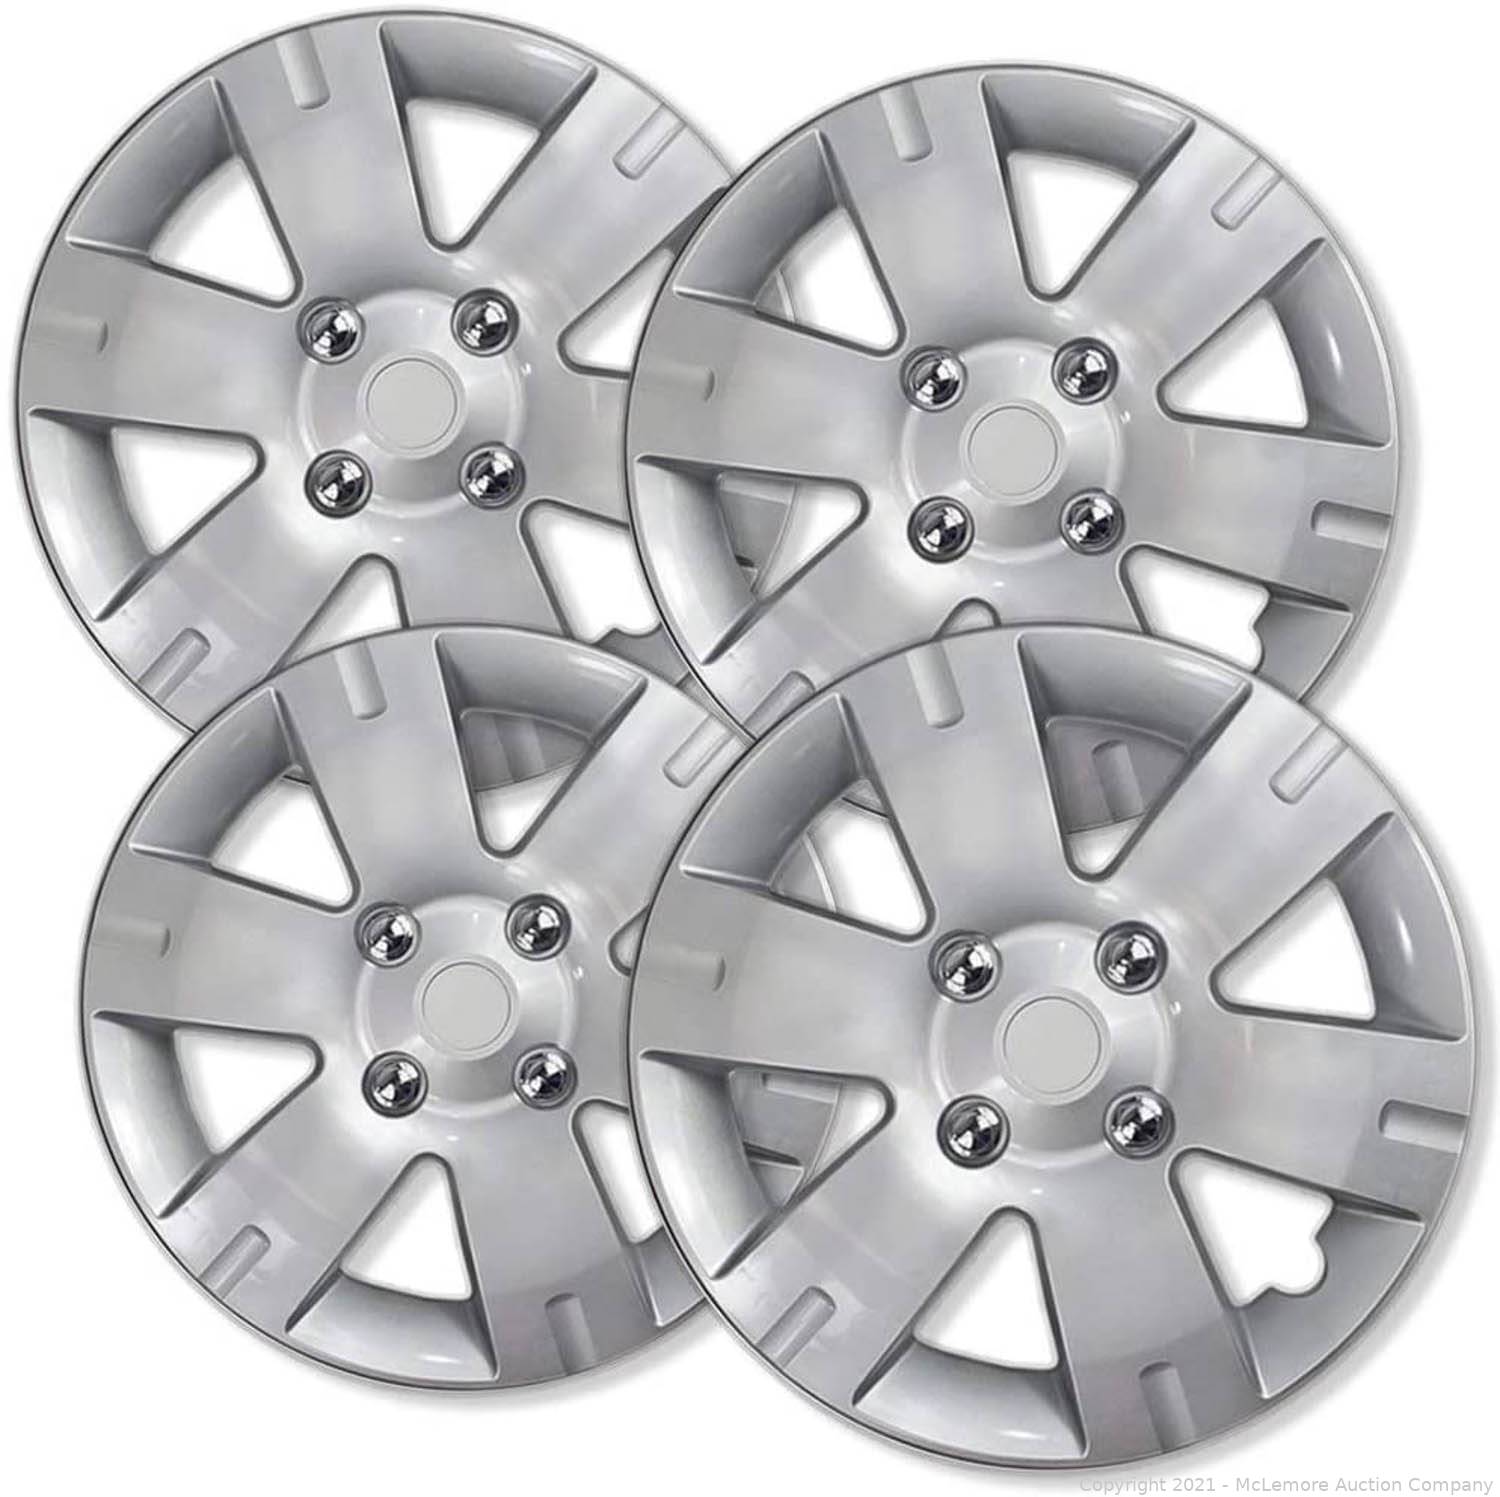 Wheel Covers 15in Hub Caps Silver Rim Cover - Car Accessories for 15 inch Wheels - Snap On Hubcap, Auto Tire Replacement Exterior Cap 15 inch Hubcaps Best for 2007-2012 Nissan Sentra Set of 4 